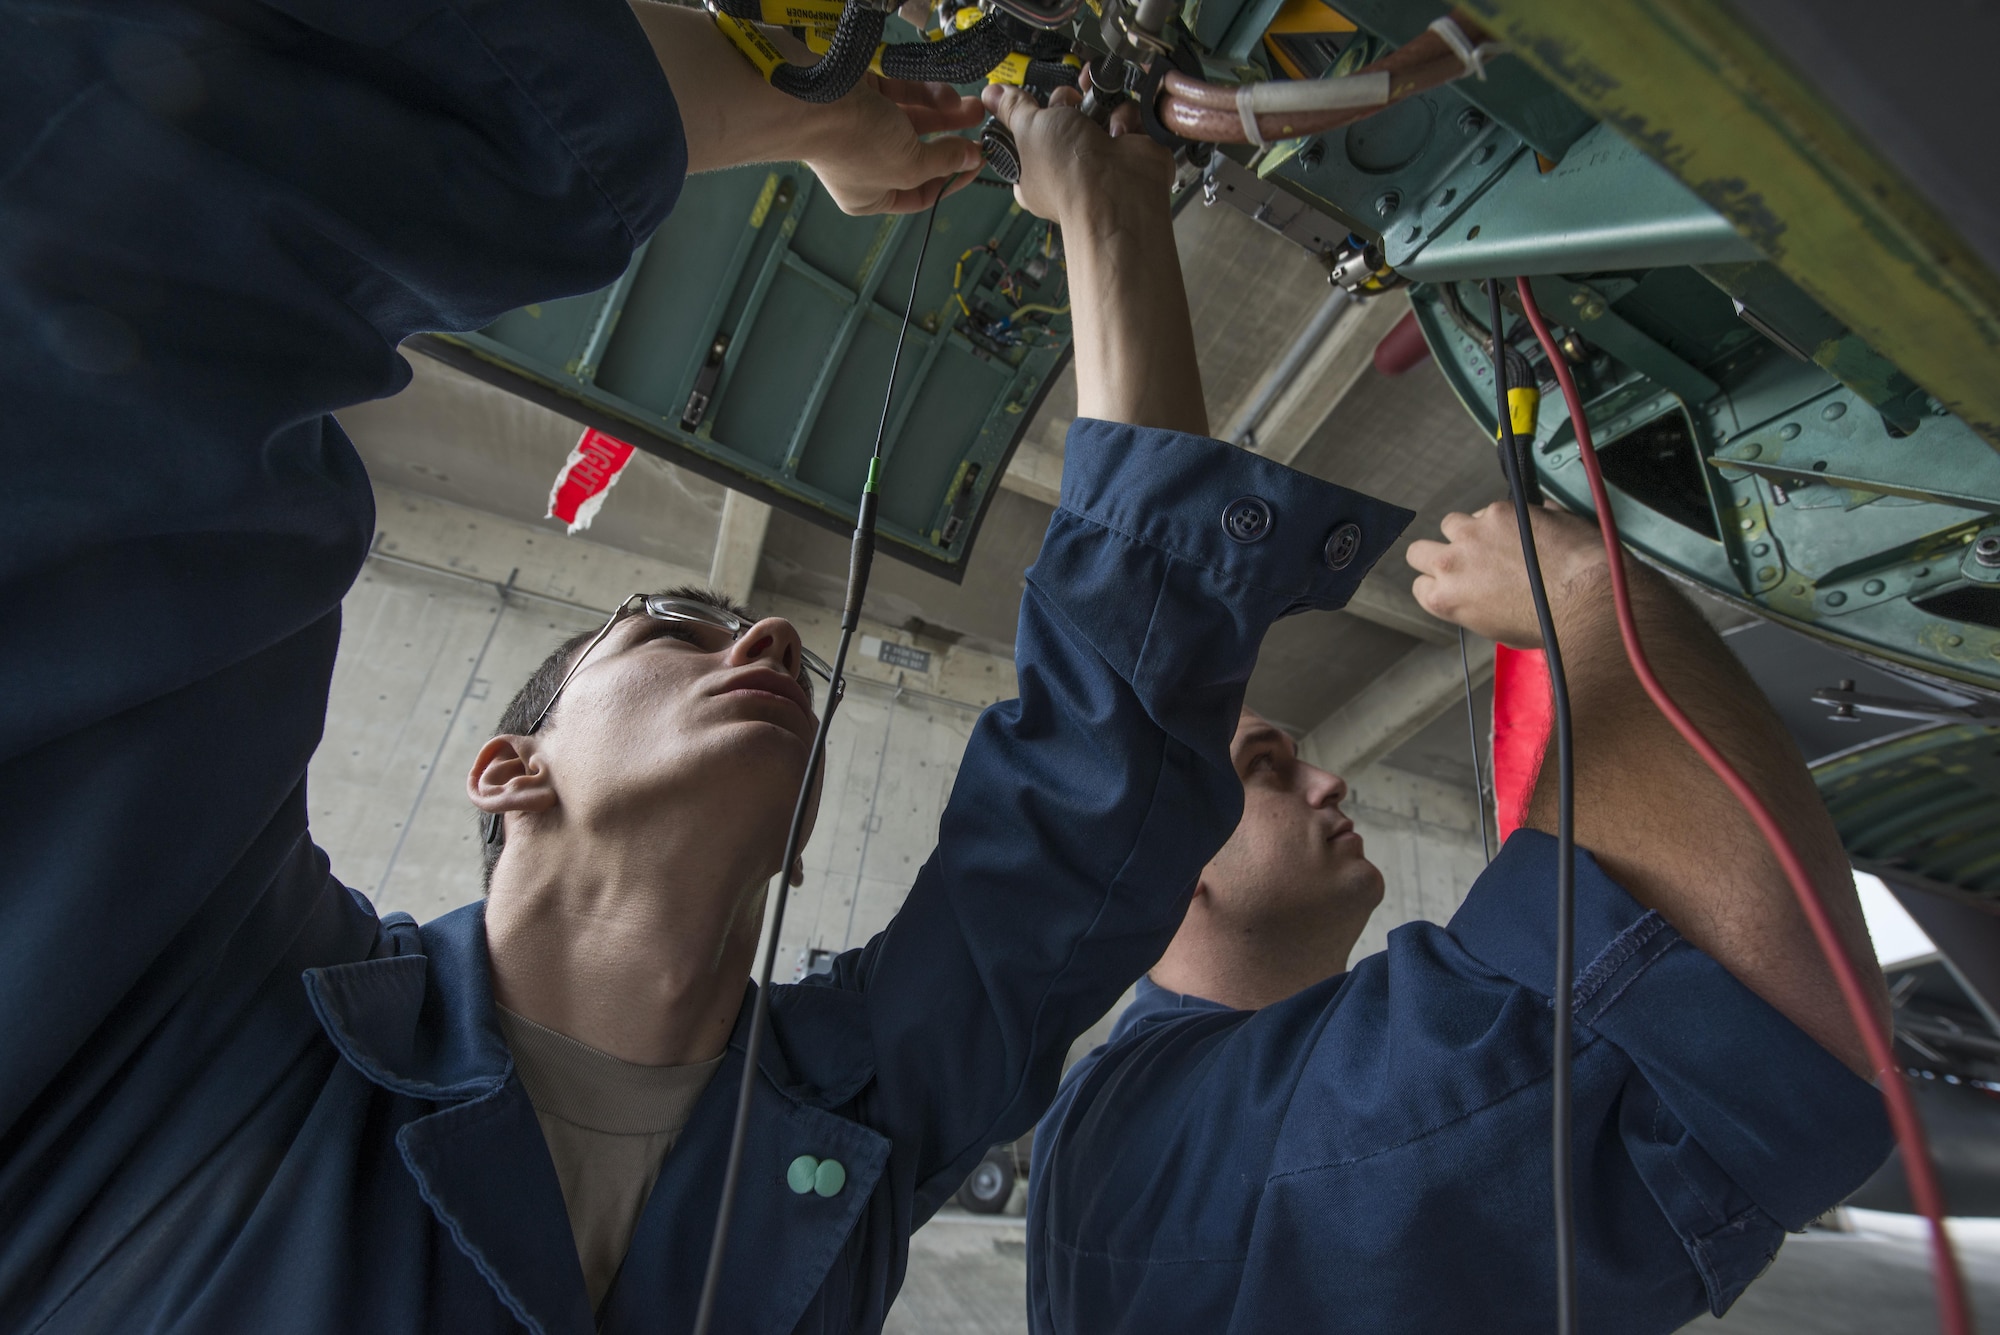 Airman 1st Class Sean Greig and Senior Airman Caleb Stephens, both 67th Aircraft Maintenance Unit avionics specialists, test F-15 Eagle components during maintenance Jan. 8, 2016, at Kadena Air Base, Japan. The two specialists were troubleshooting a problem with the aircraft that limited its ability to measure and display the distance to the airfield. (U.S. Air Force photo/Staff Sgt. Maeson L. Elleman)